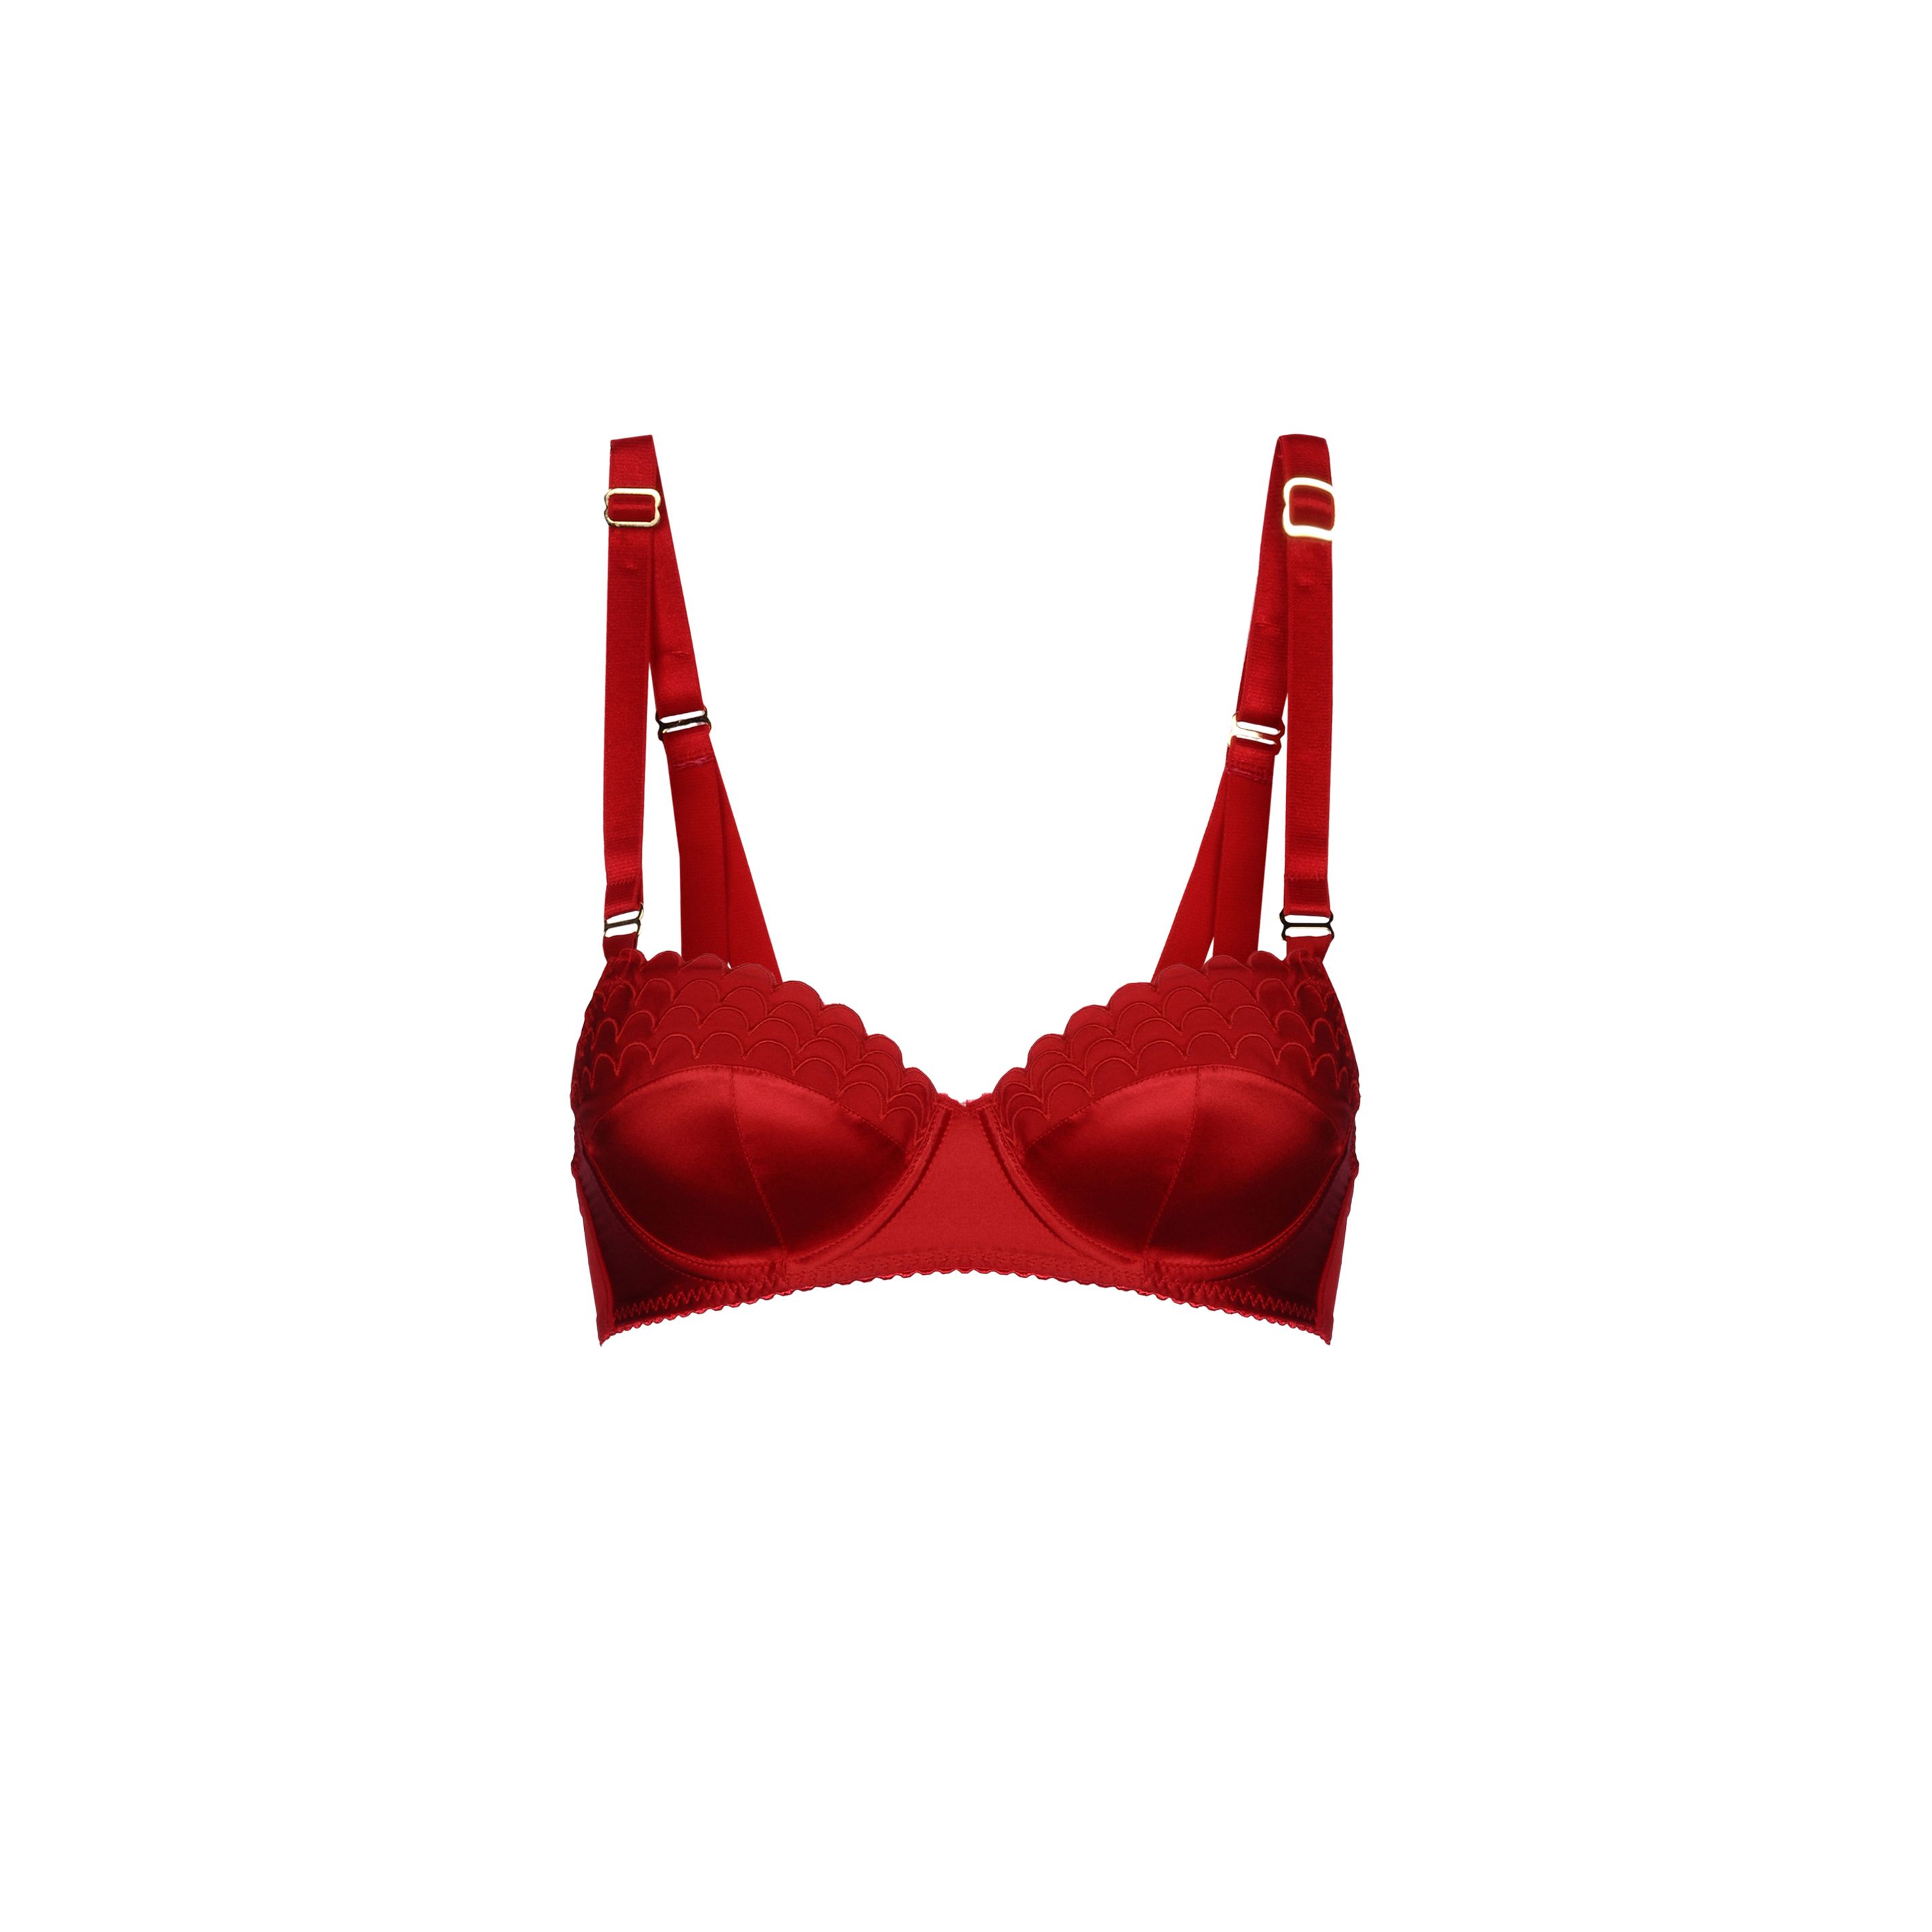 Stella McCartney - Sam Partying Balconette Bra - Shop at the official ...